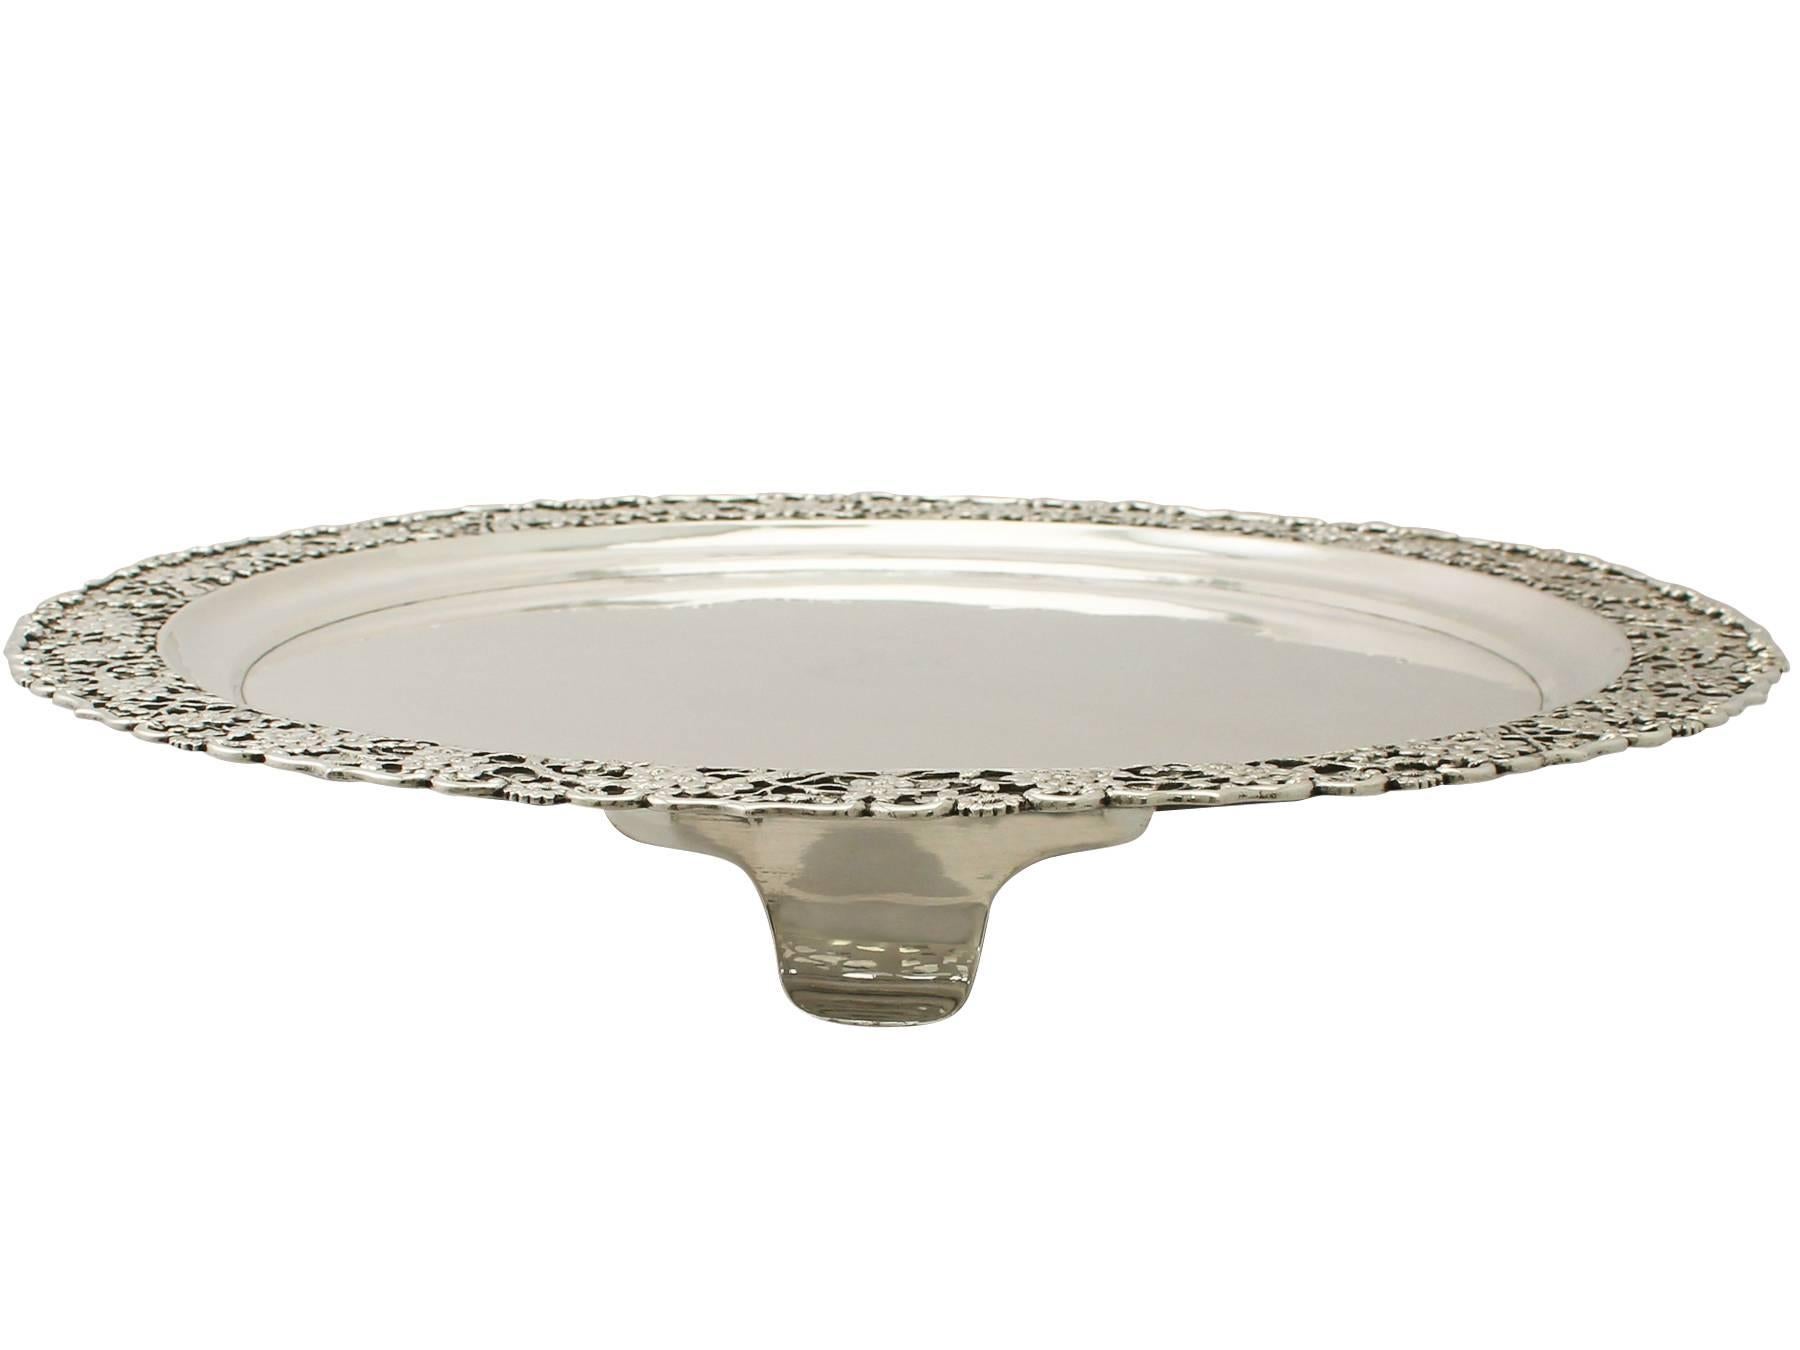 A magnificent, Fine and impressive, large antique Chinese Export Silver salver; an addition to our Asian silver collection.

This magnificent antique Chinese Export Silver (CES) salver has a circular shaped form.

The centre of the salver is